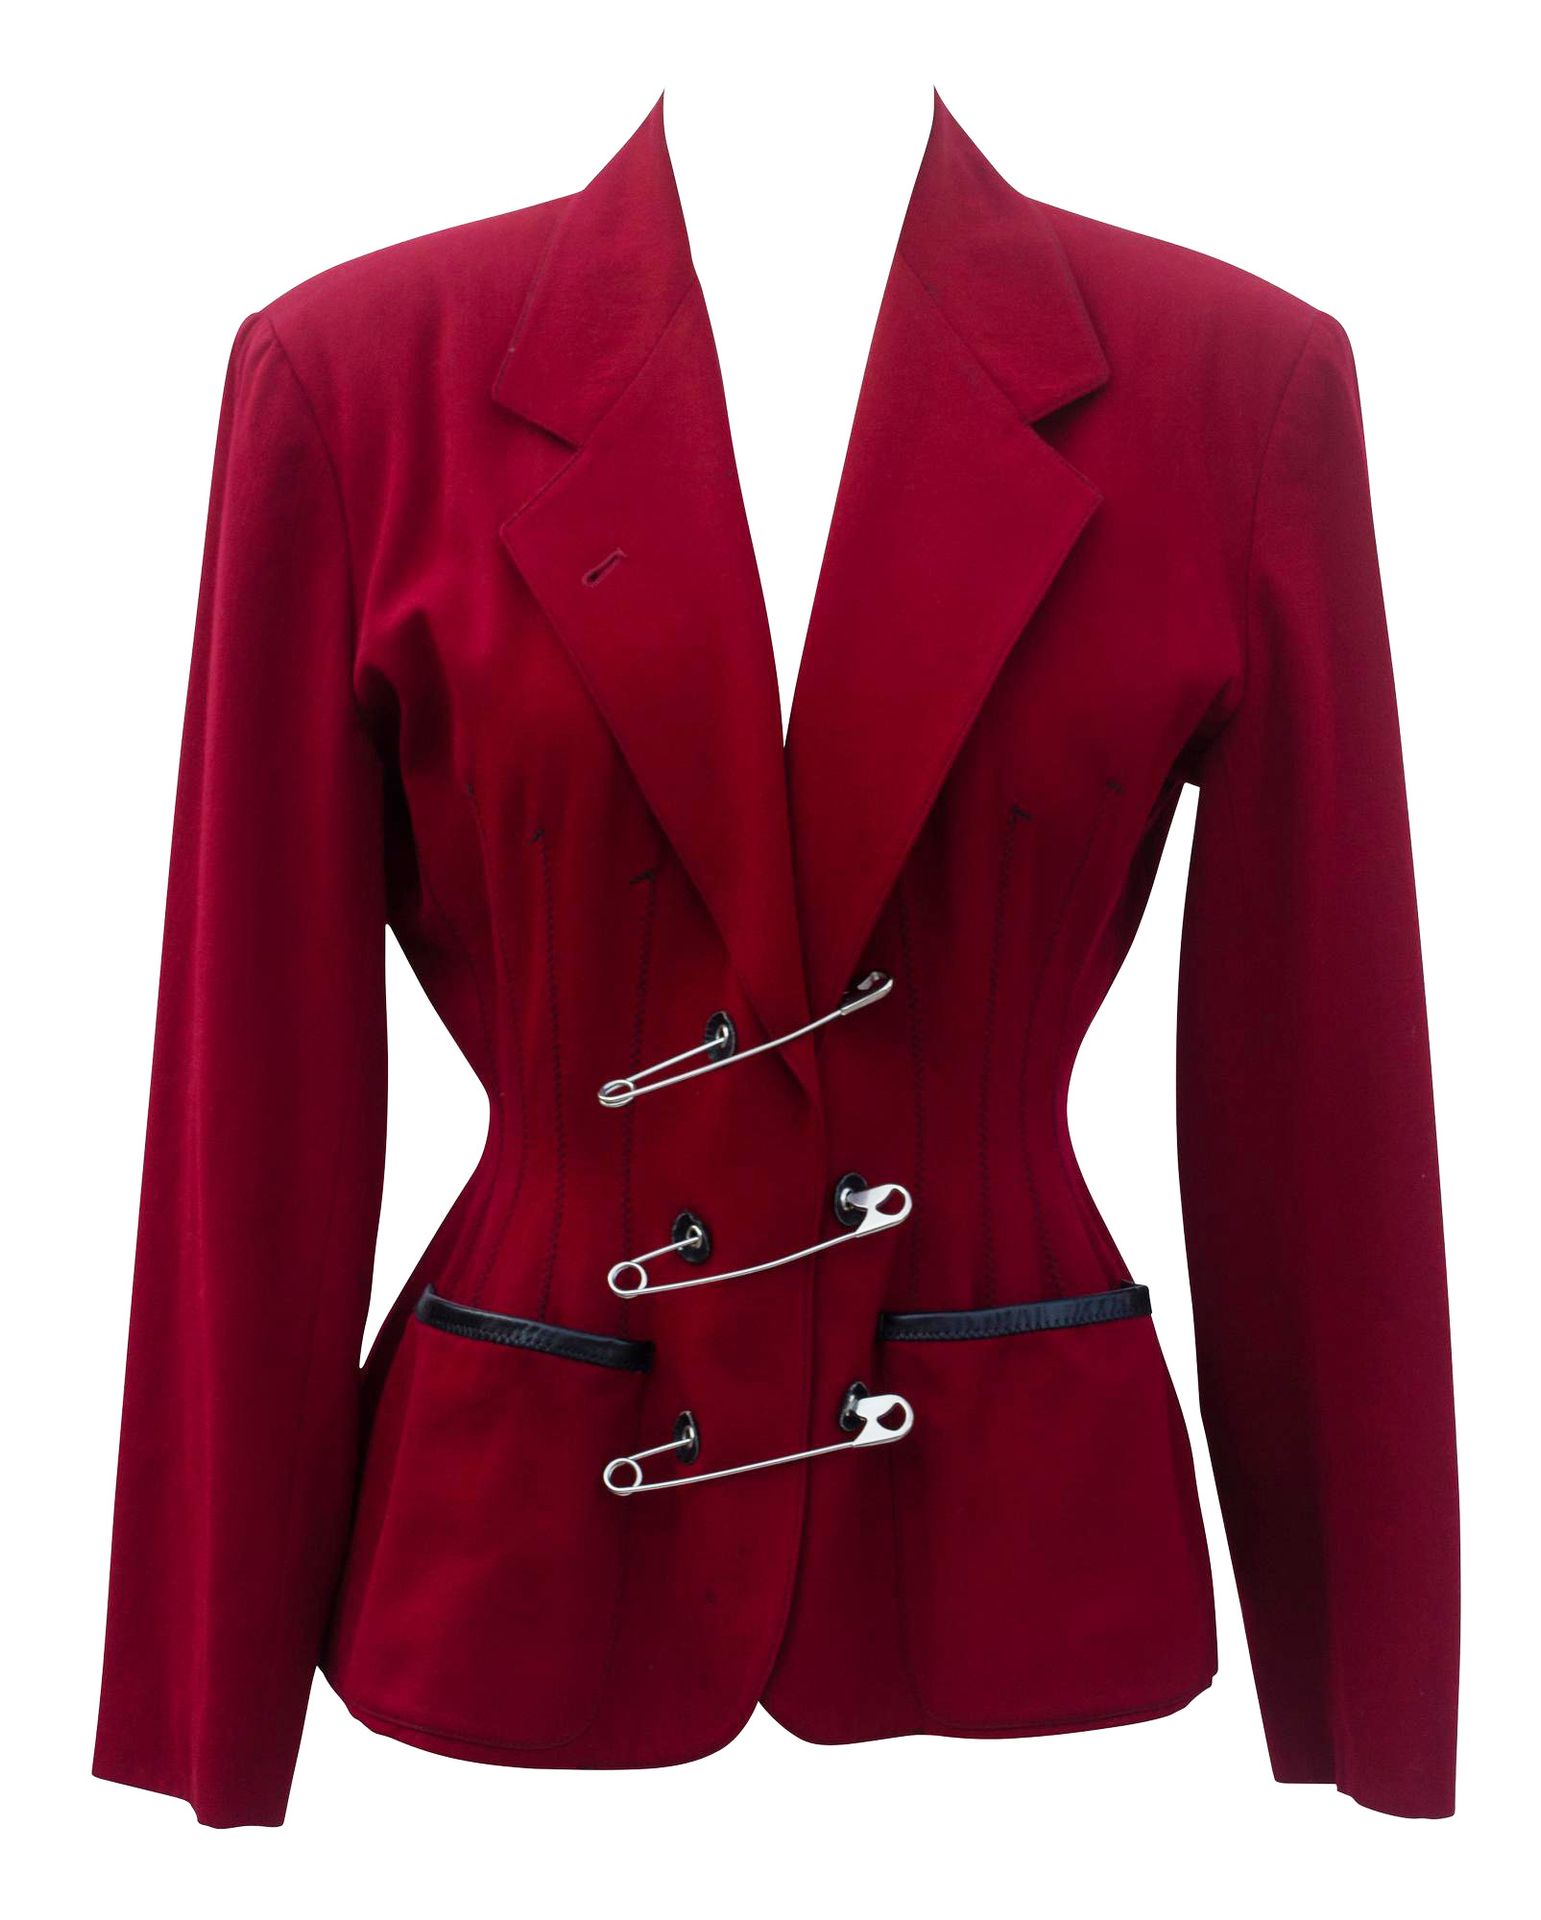 Null 
Jean Paul Gaultier 




SAFETY PINS JACKET









Description:




Iconi&hellip;